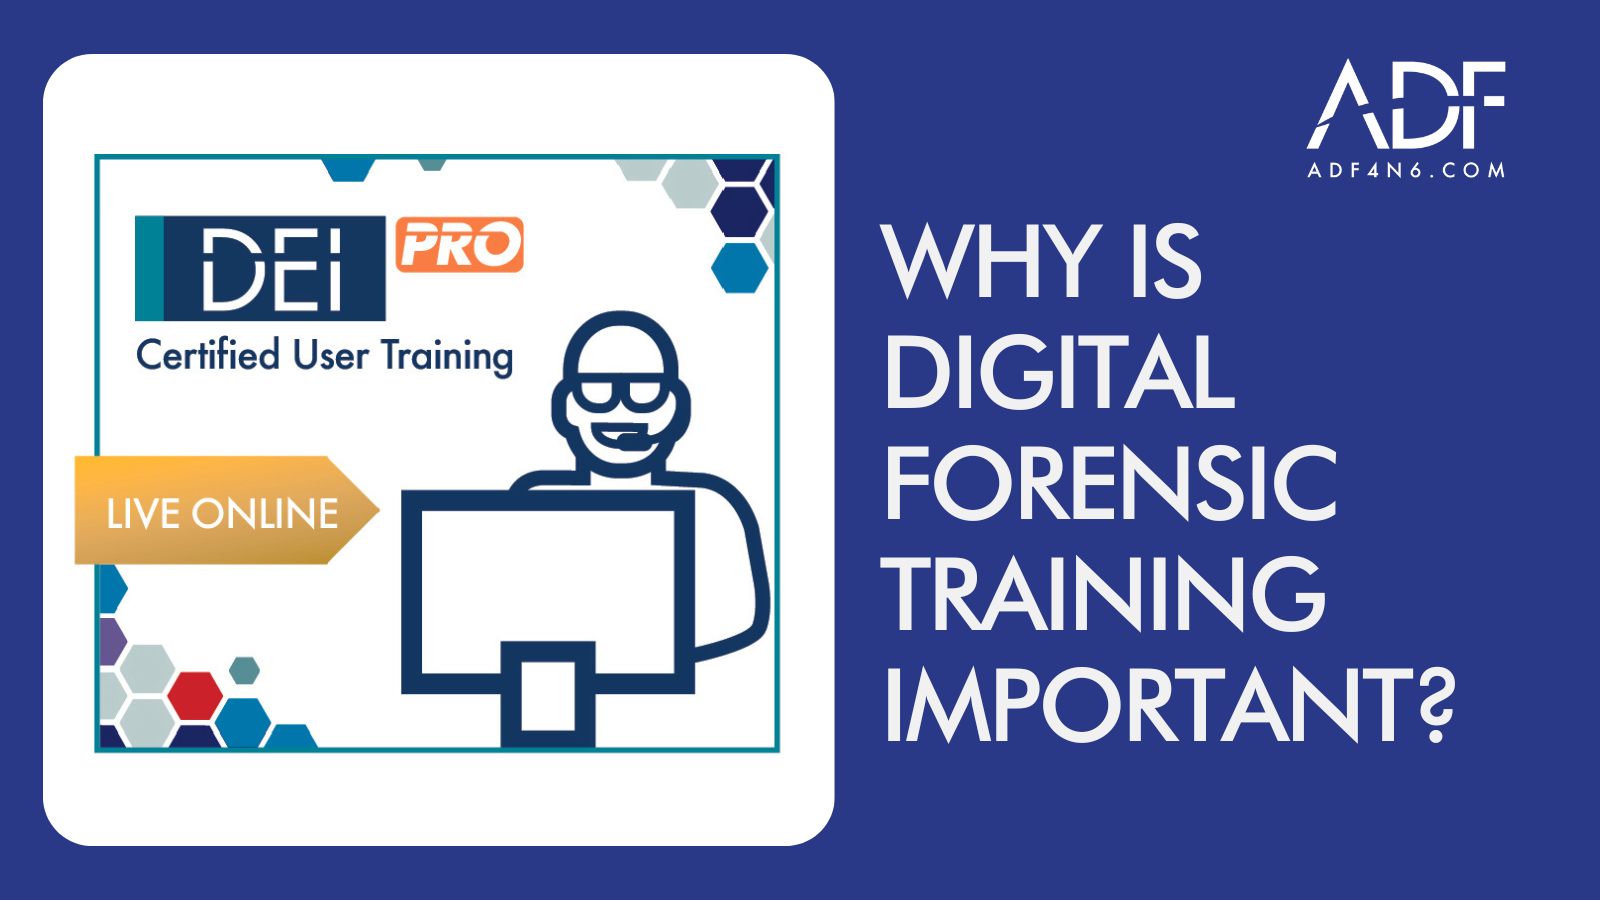 Why is Digital Forensic Training Important?